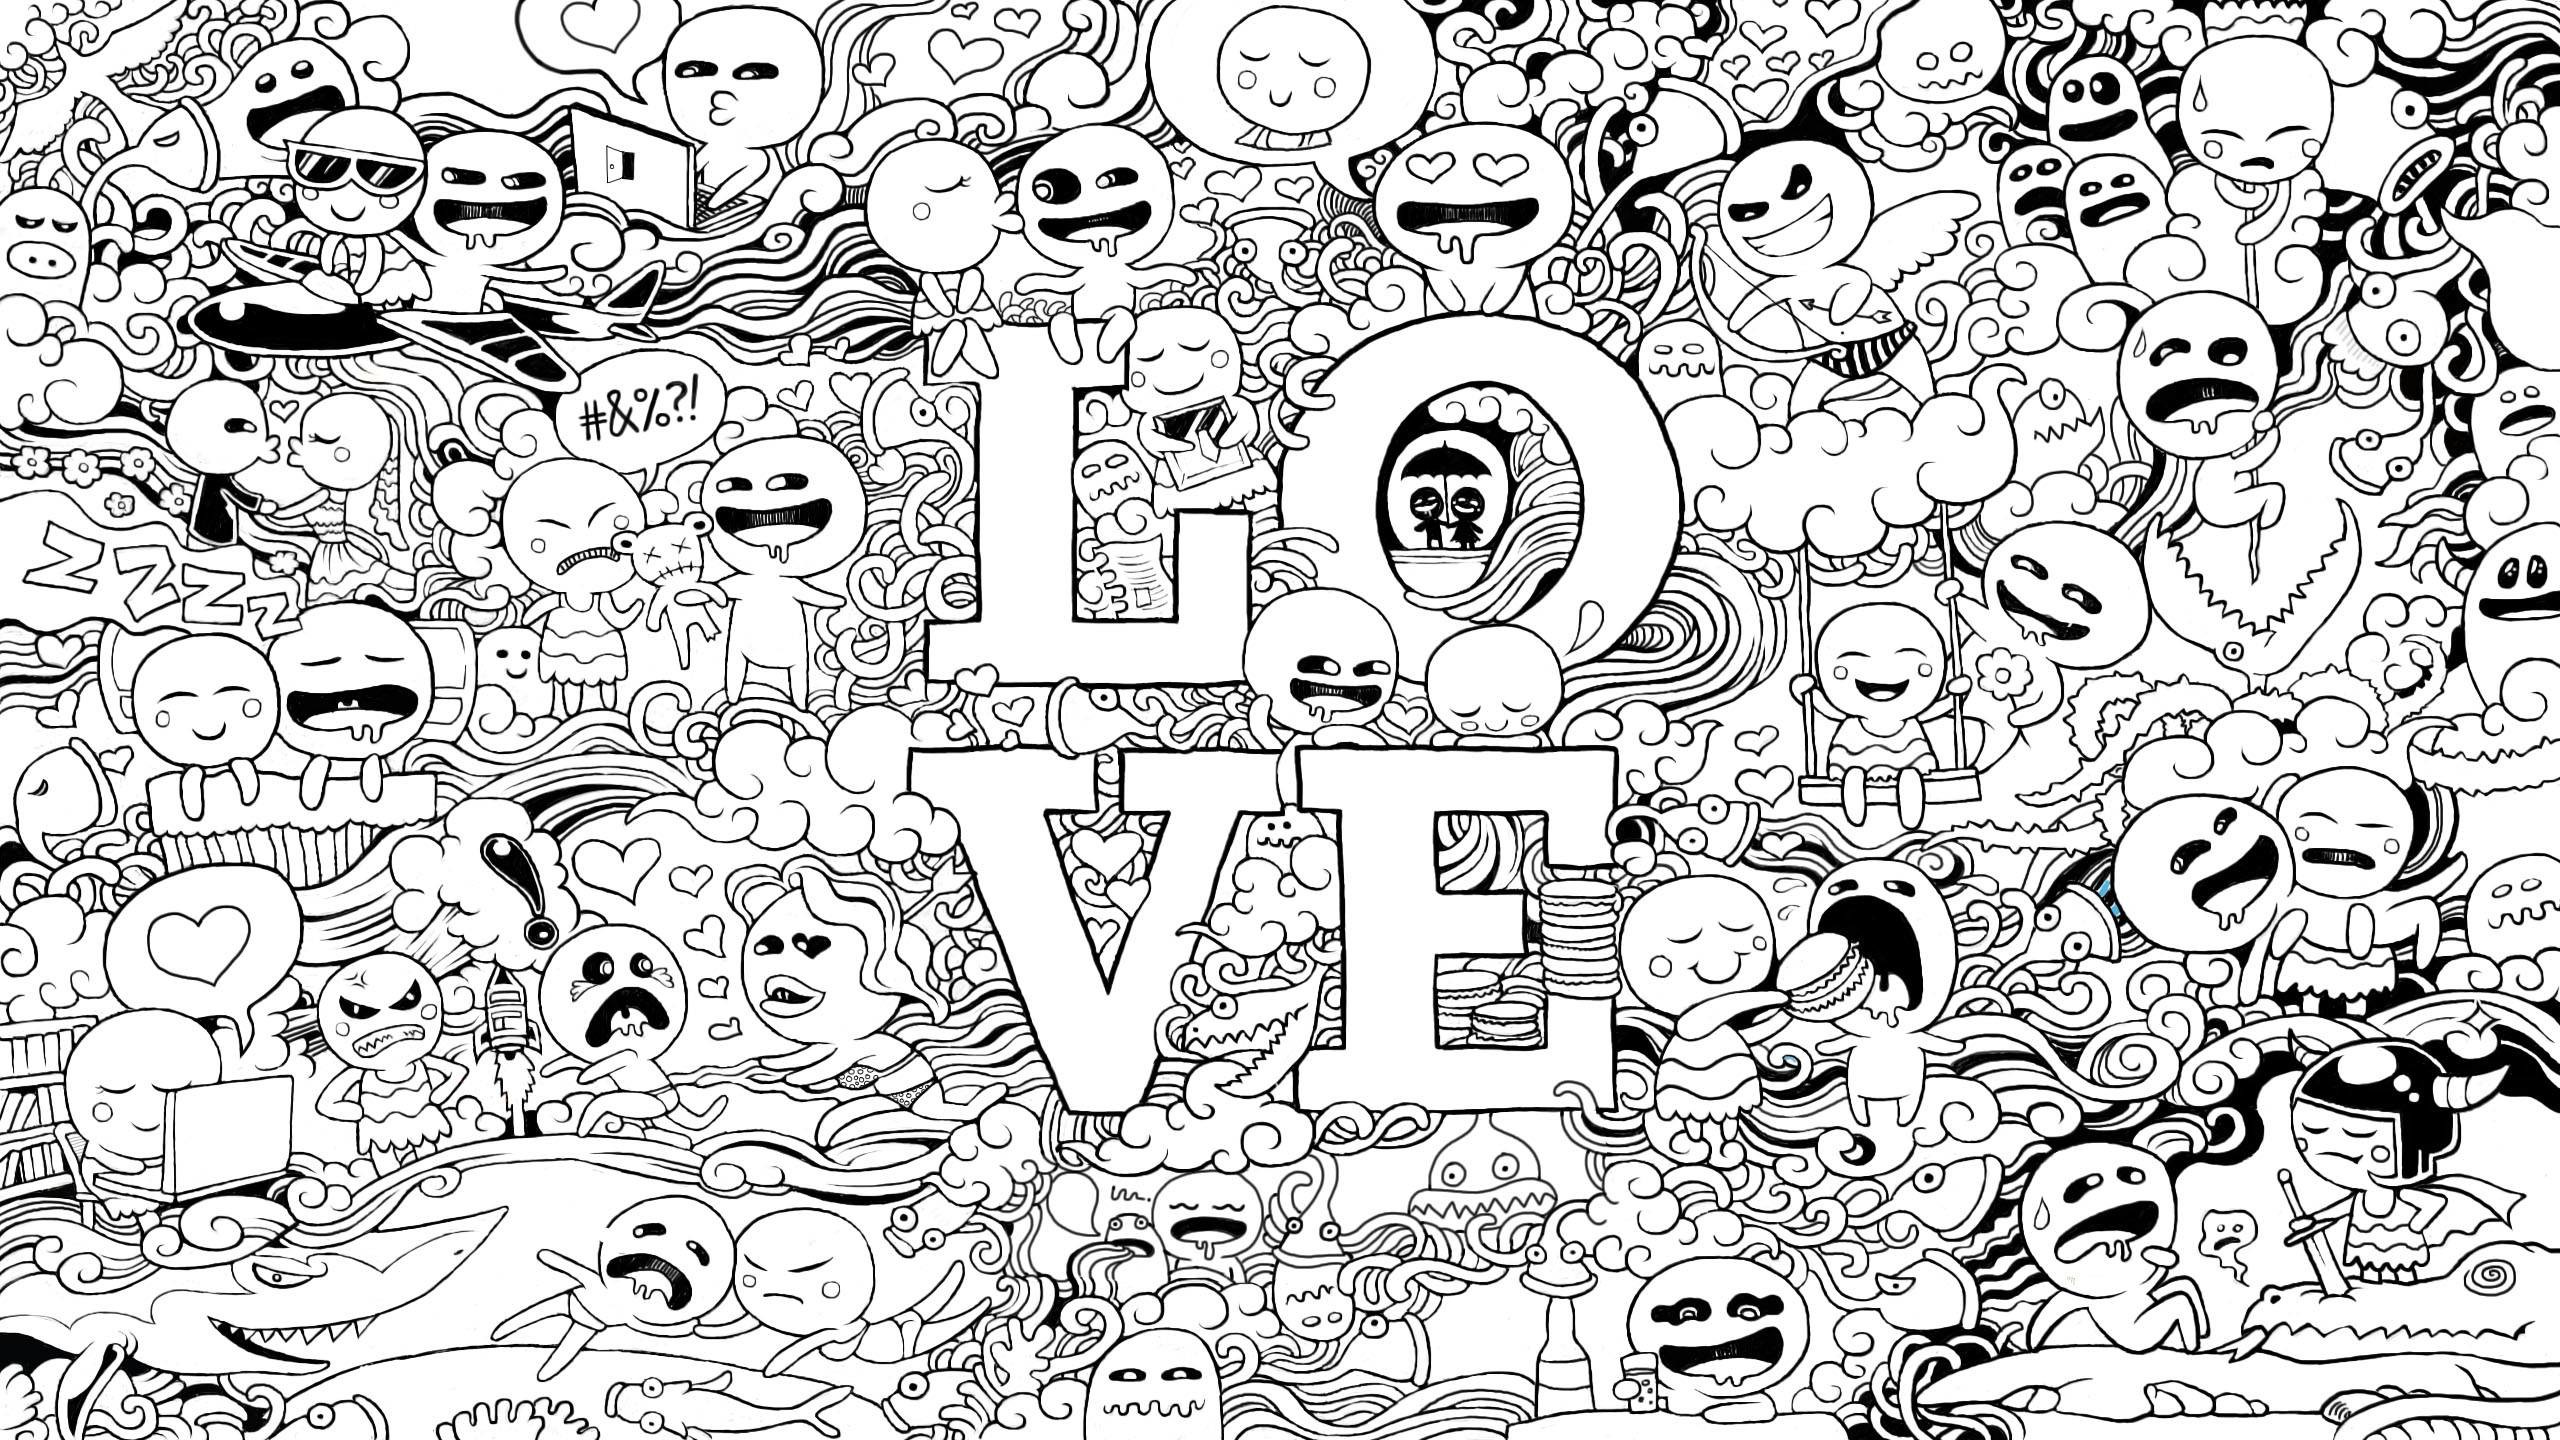 2560x1440 Wallpaper Freebie for February 2013: LOVE Doodles – You The Designer